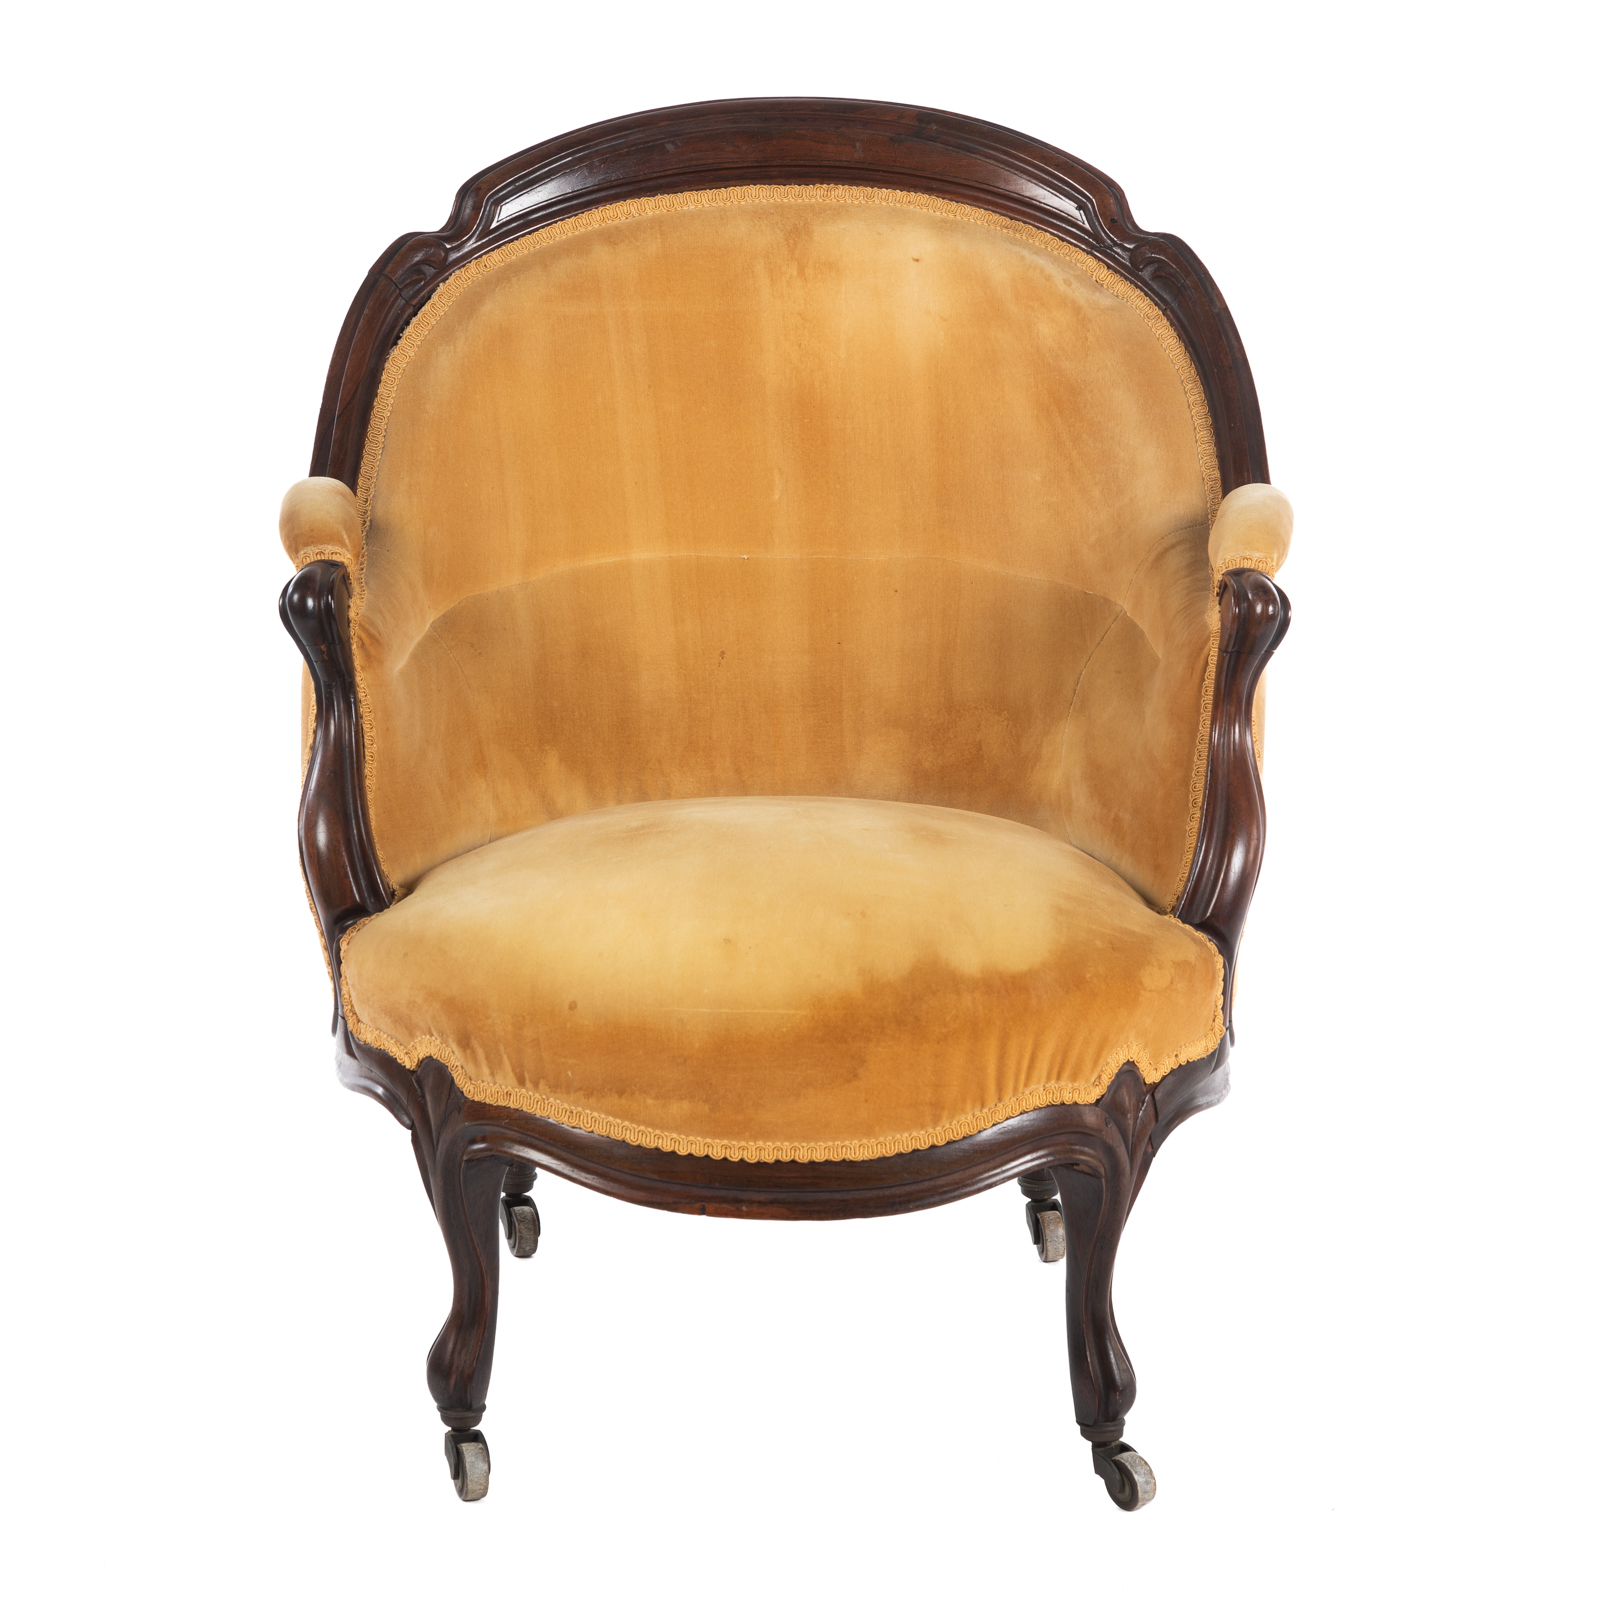 VICTORIAN UPHOLSTERED TUB CHAIR 369814